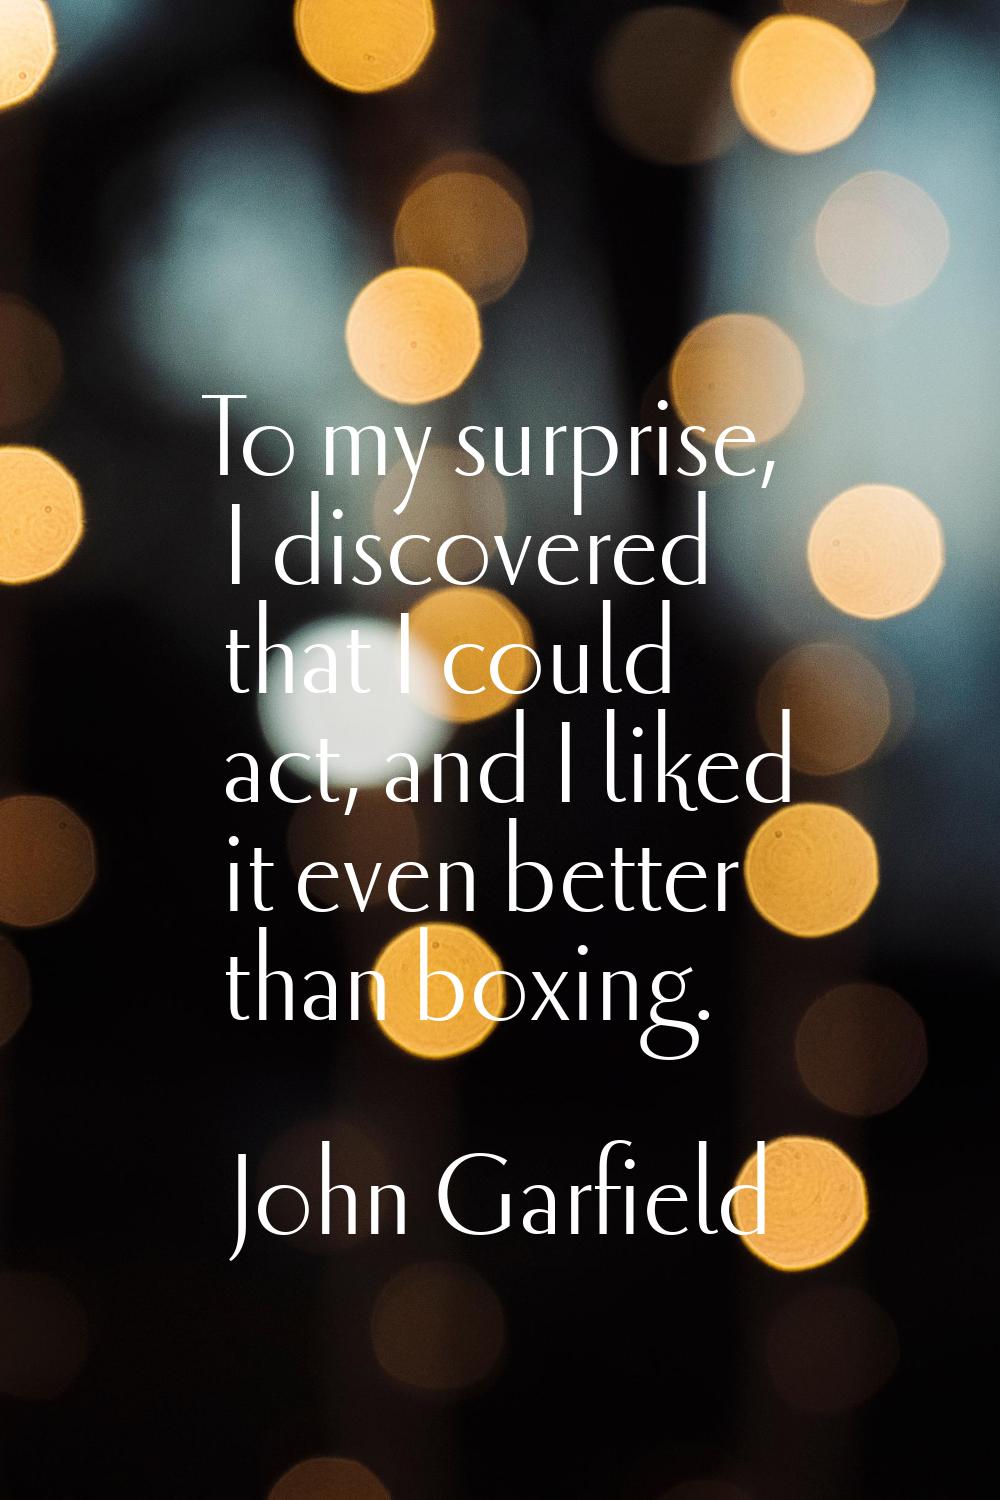 To my surprise, I discovered that I could act, and I liked it even better than boxing.